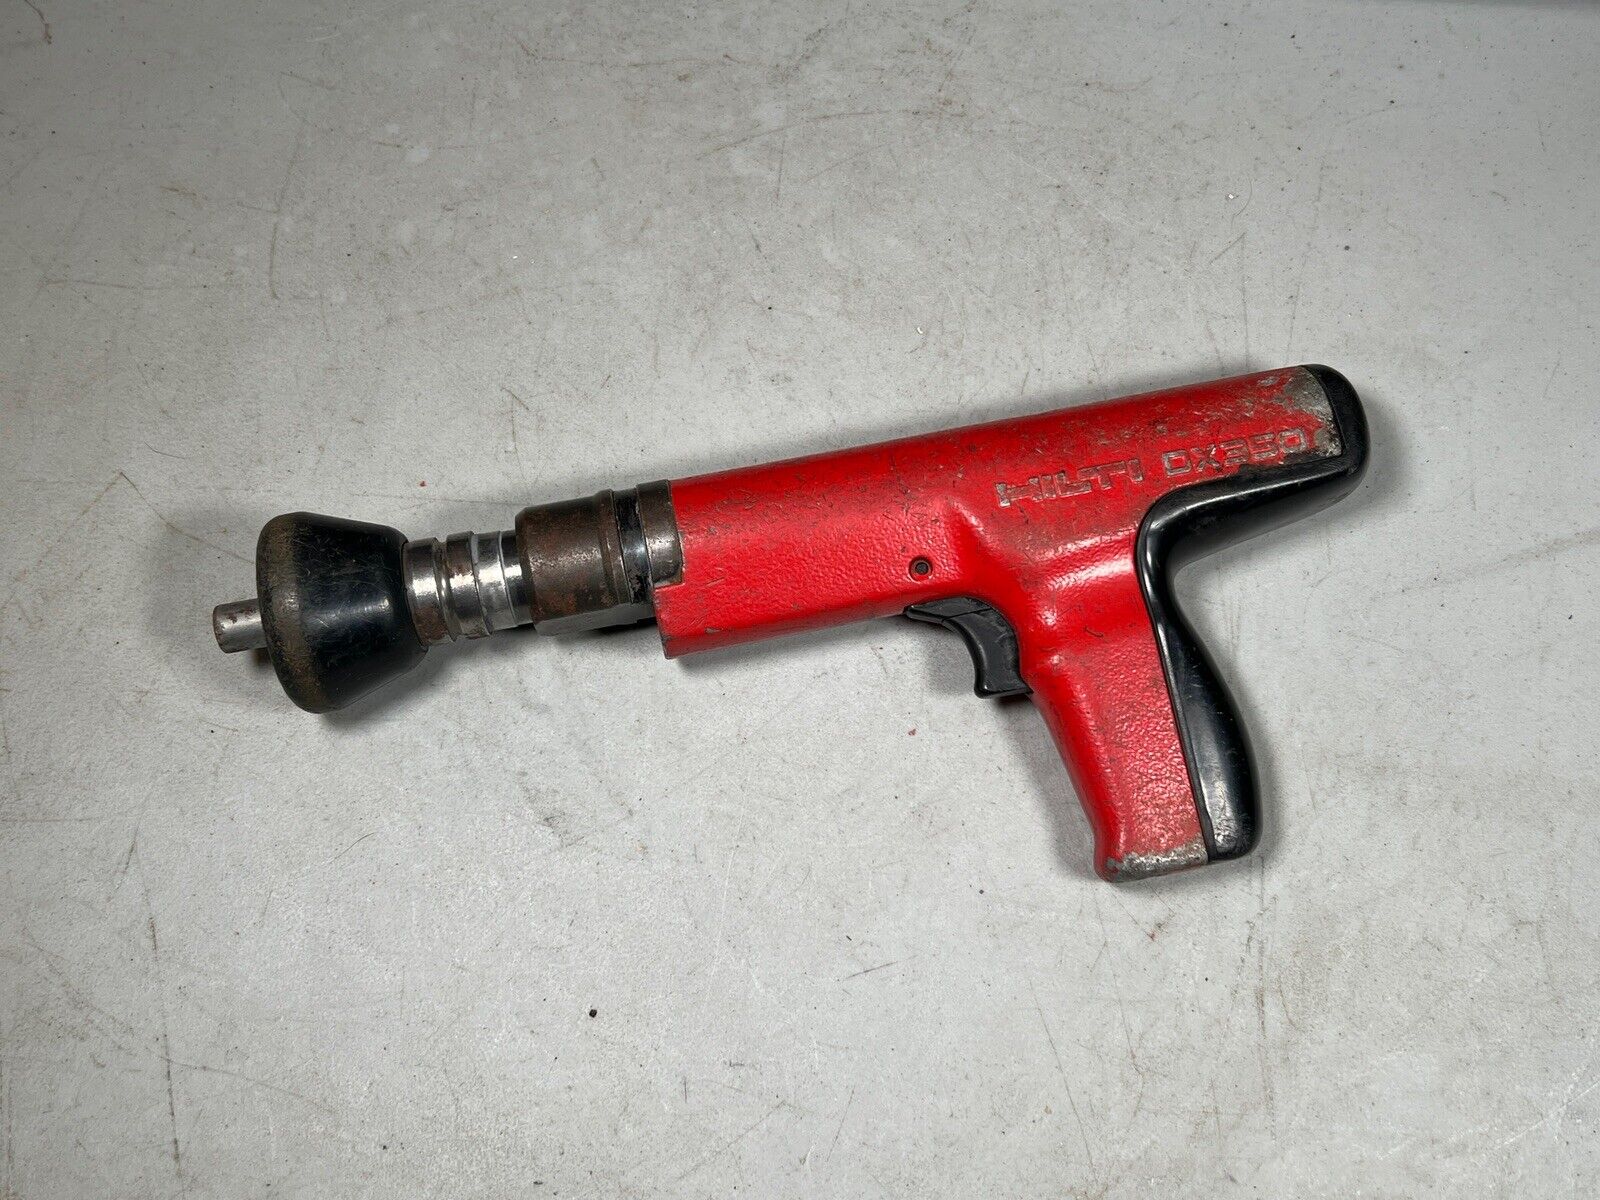 Hilti DX350 Powder Actuated Nail Gun Fastening Drive Tool Pre-owned Working